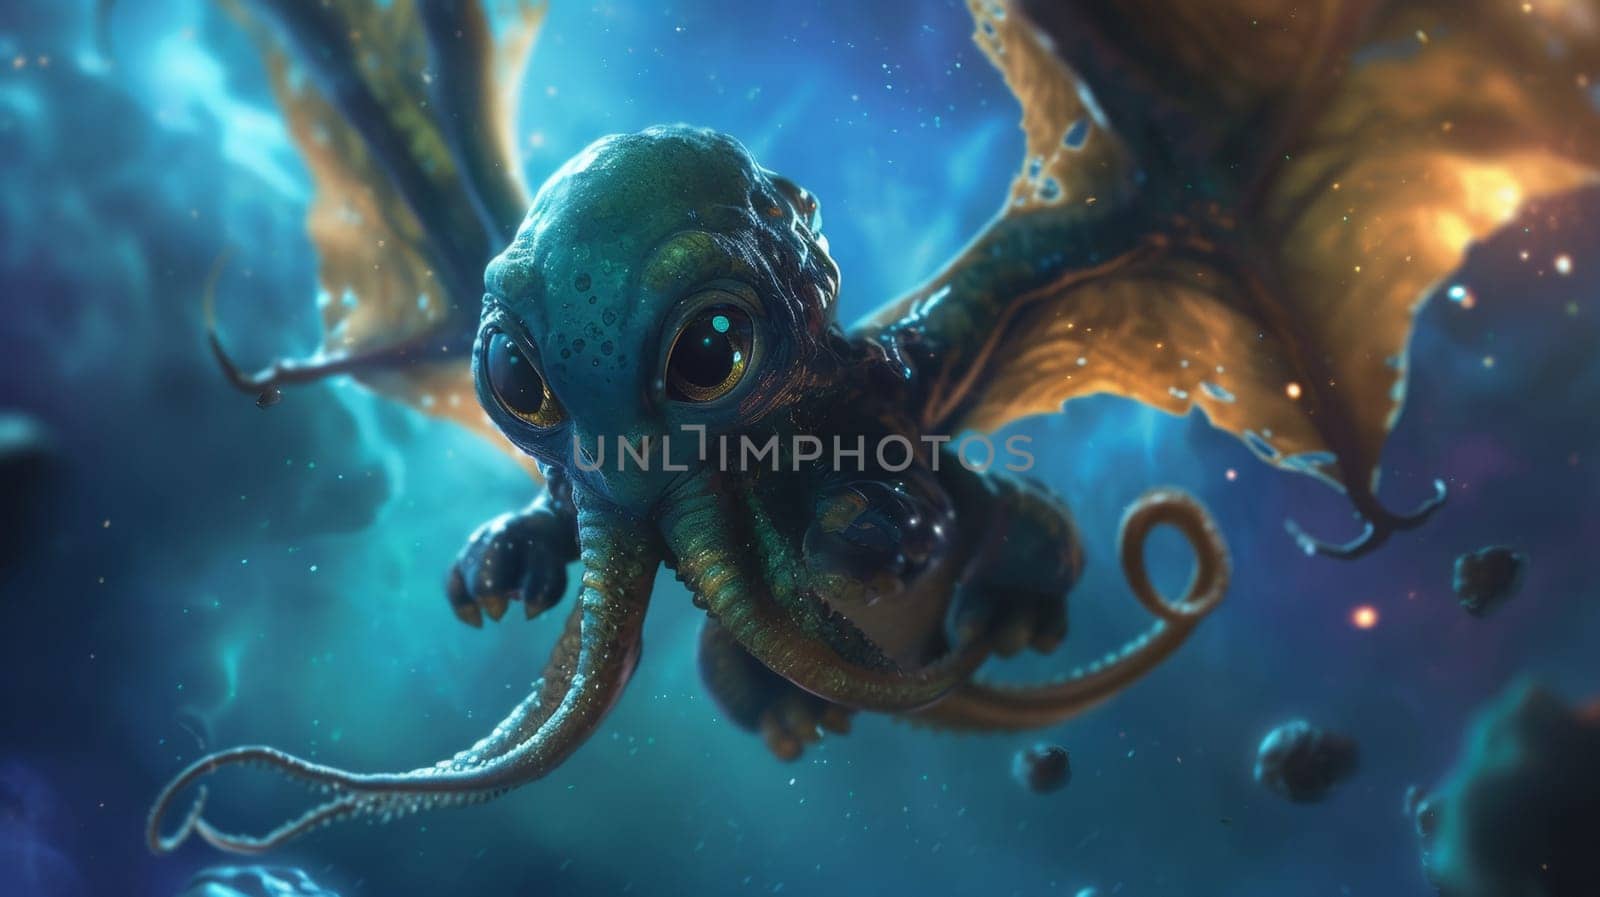 A close up of a dragon with large eyes and long tentacles